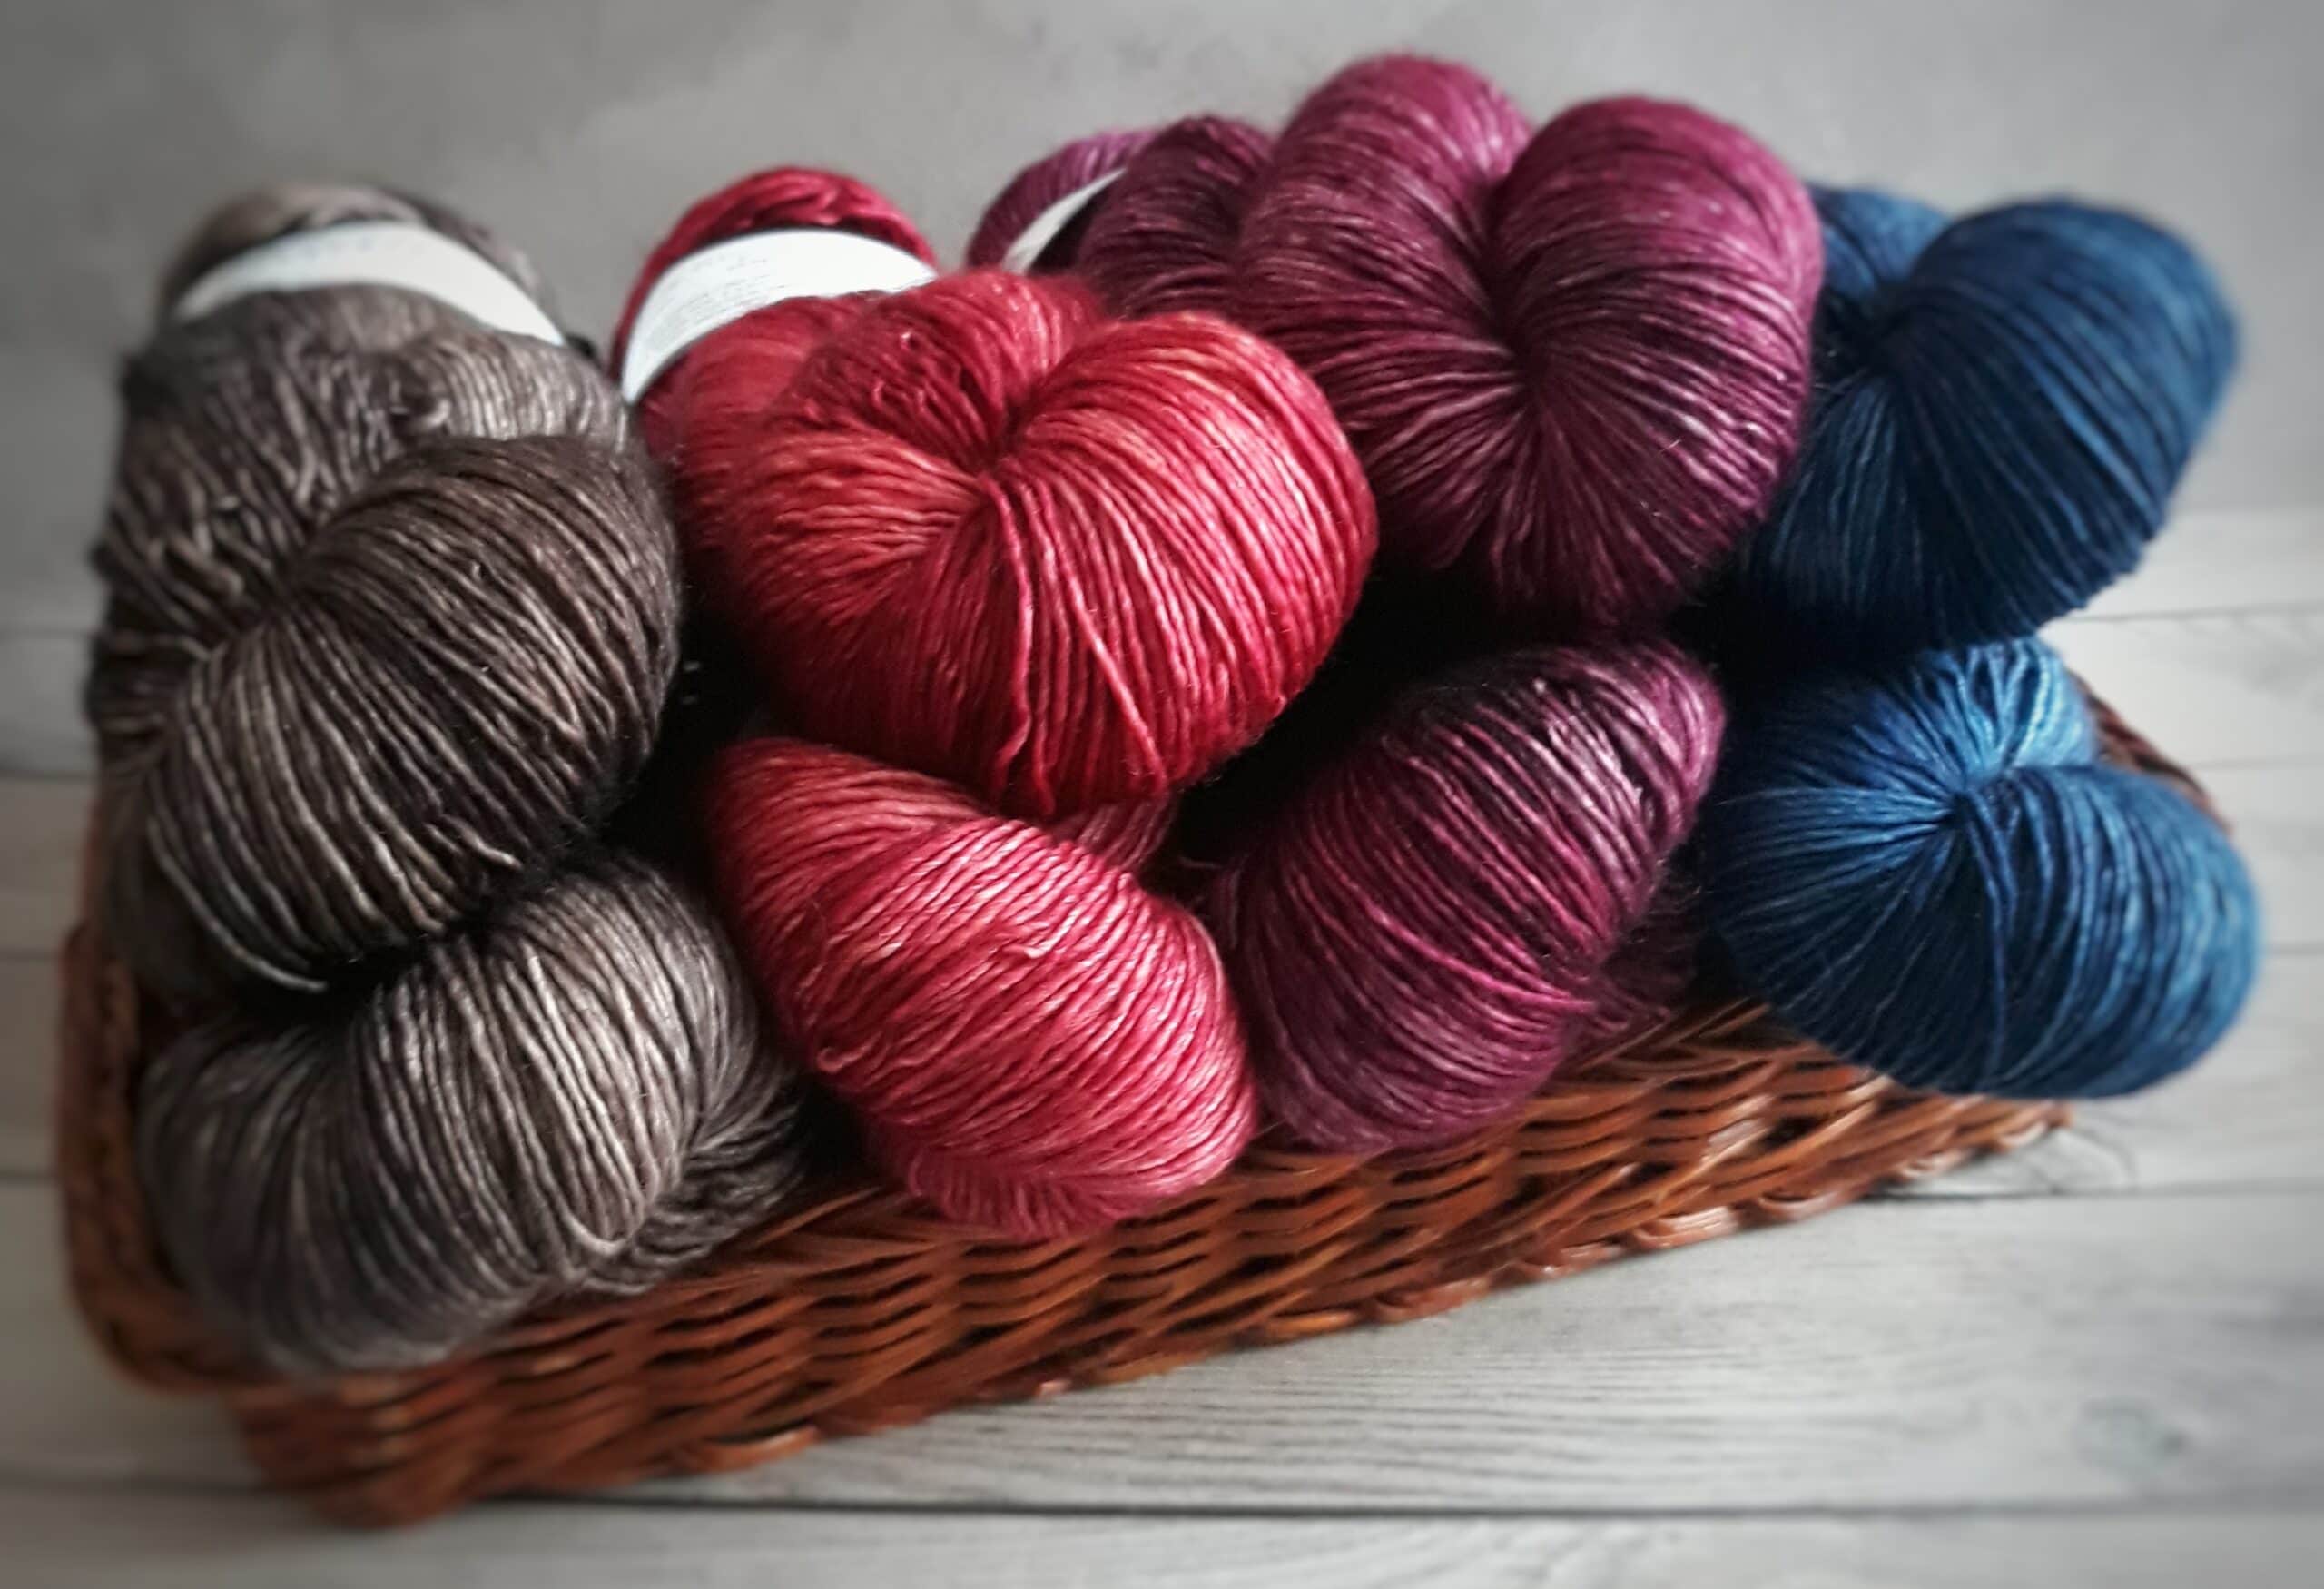 What Is Waste Yarn?